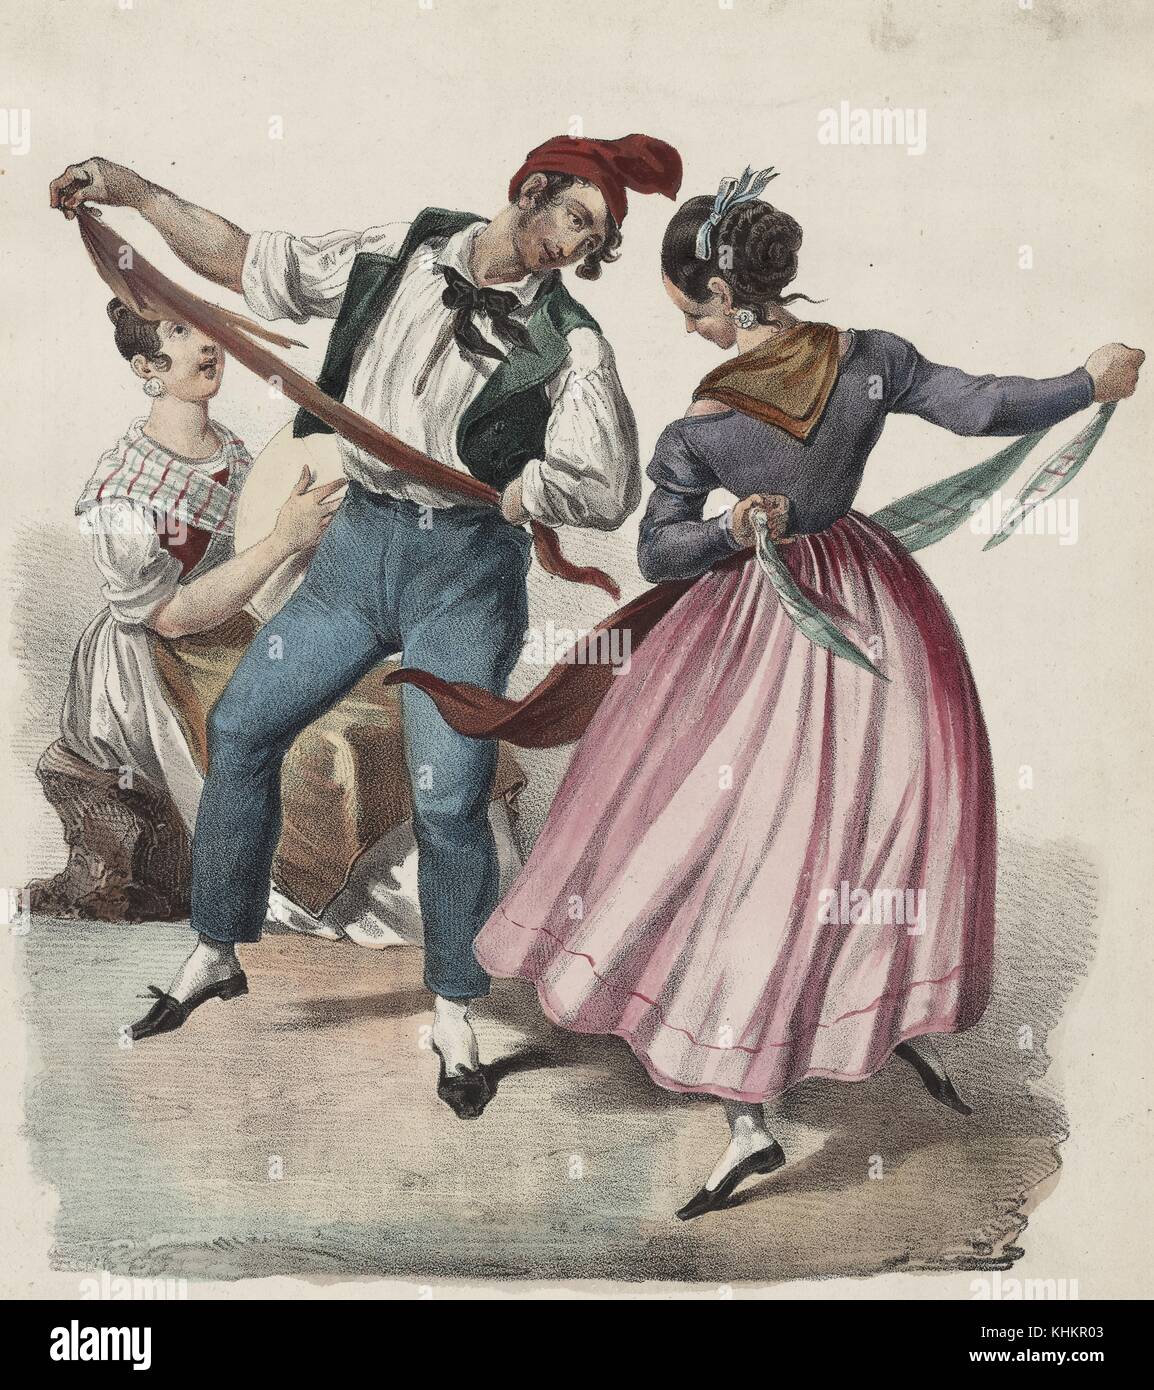 A color lithograph that depicts three people, a man and woman are performing a dance in the foreground, they are wearing traditional clothing from the Naples region, the man wears blue pants, a loose white shirt and black vest, the woman wears a long pink skirt and blue top, both are using a long piece of cloth to perform the dance, a woman in the background plays a large drum to provide a rhythm for the dancers, 1854. From the New York Public Library. Stock Photo